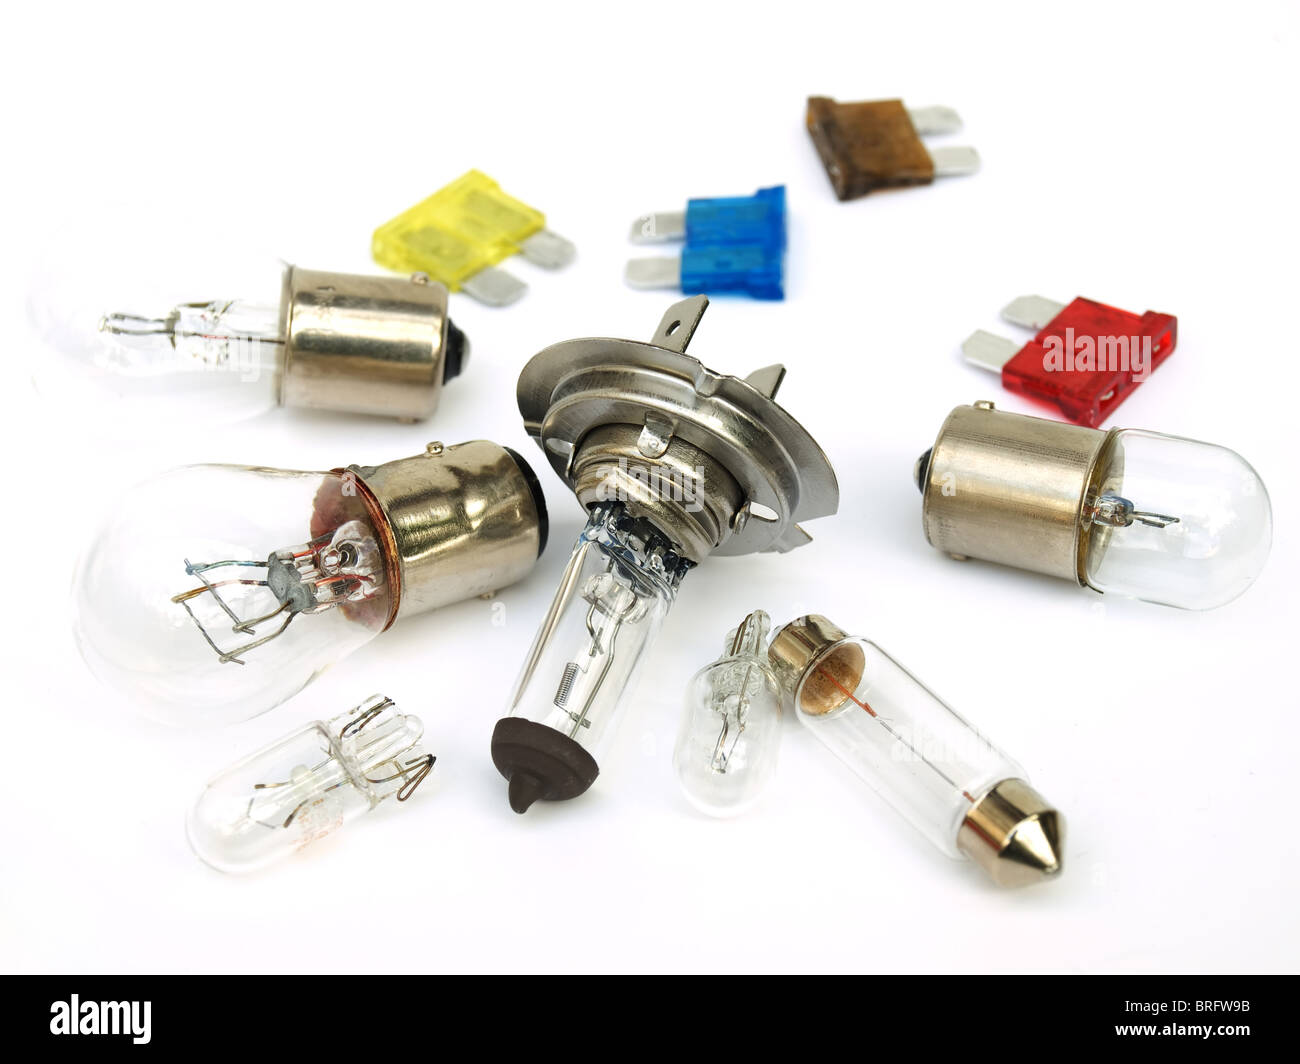 Car light bulb and fuse set on a clear background. Stock Photo